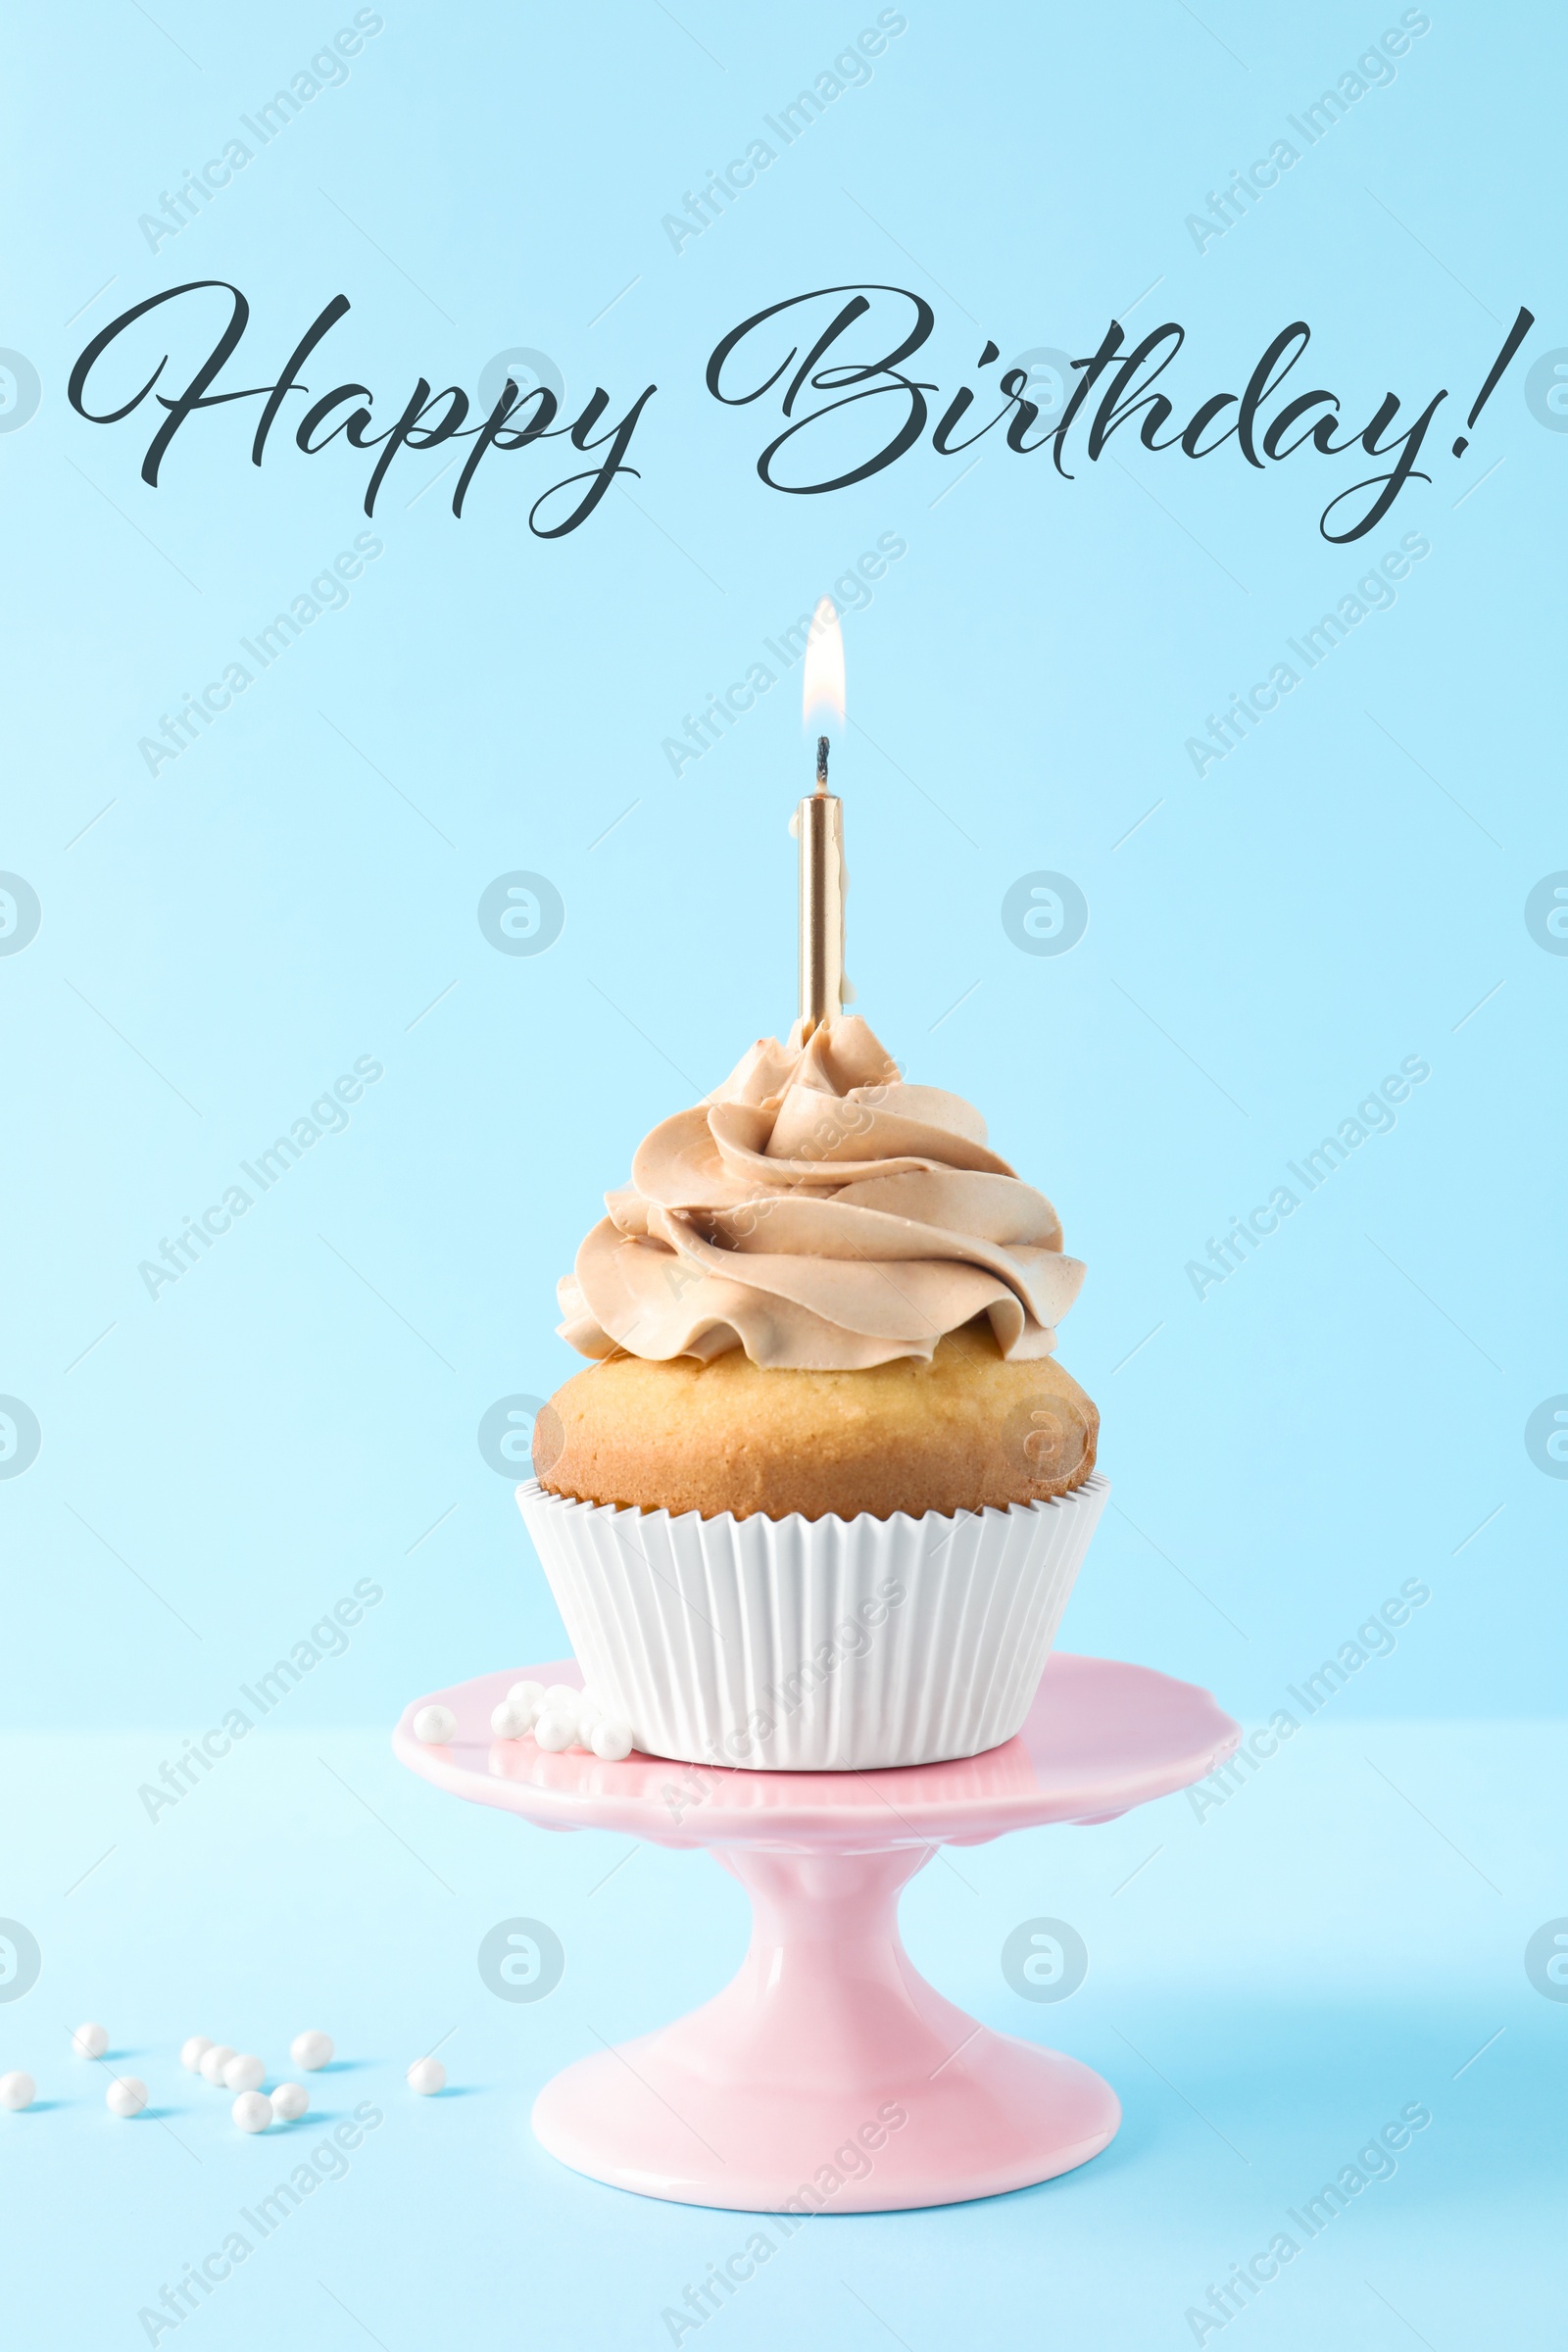 Image of Happy Birthday! Dessert stand with delicious cupcake on light blue background